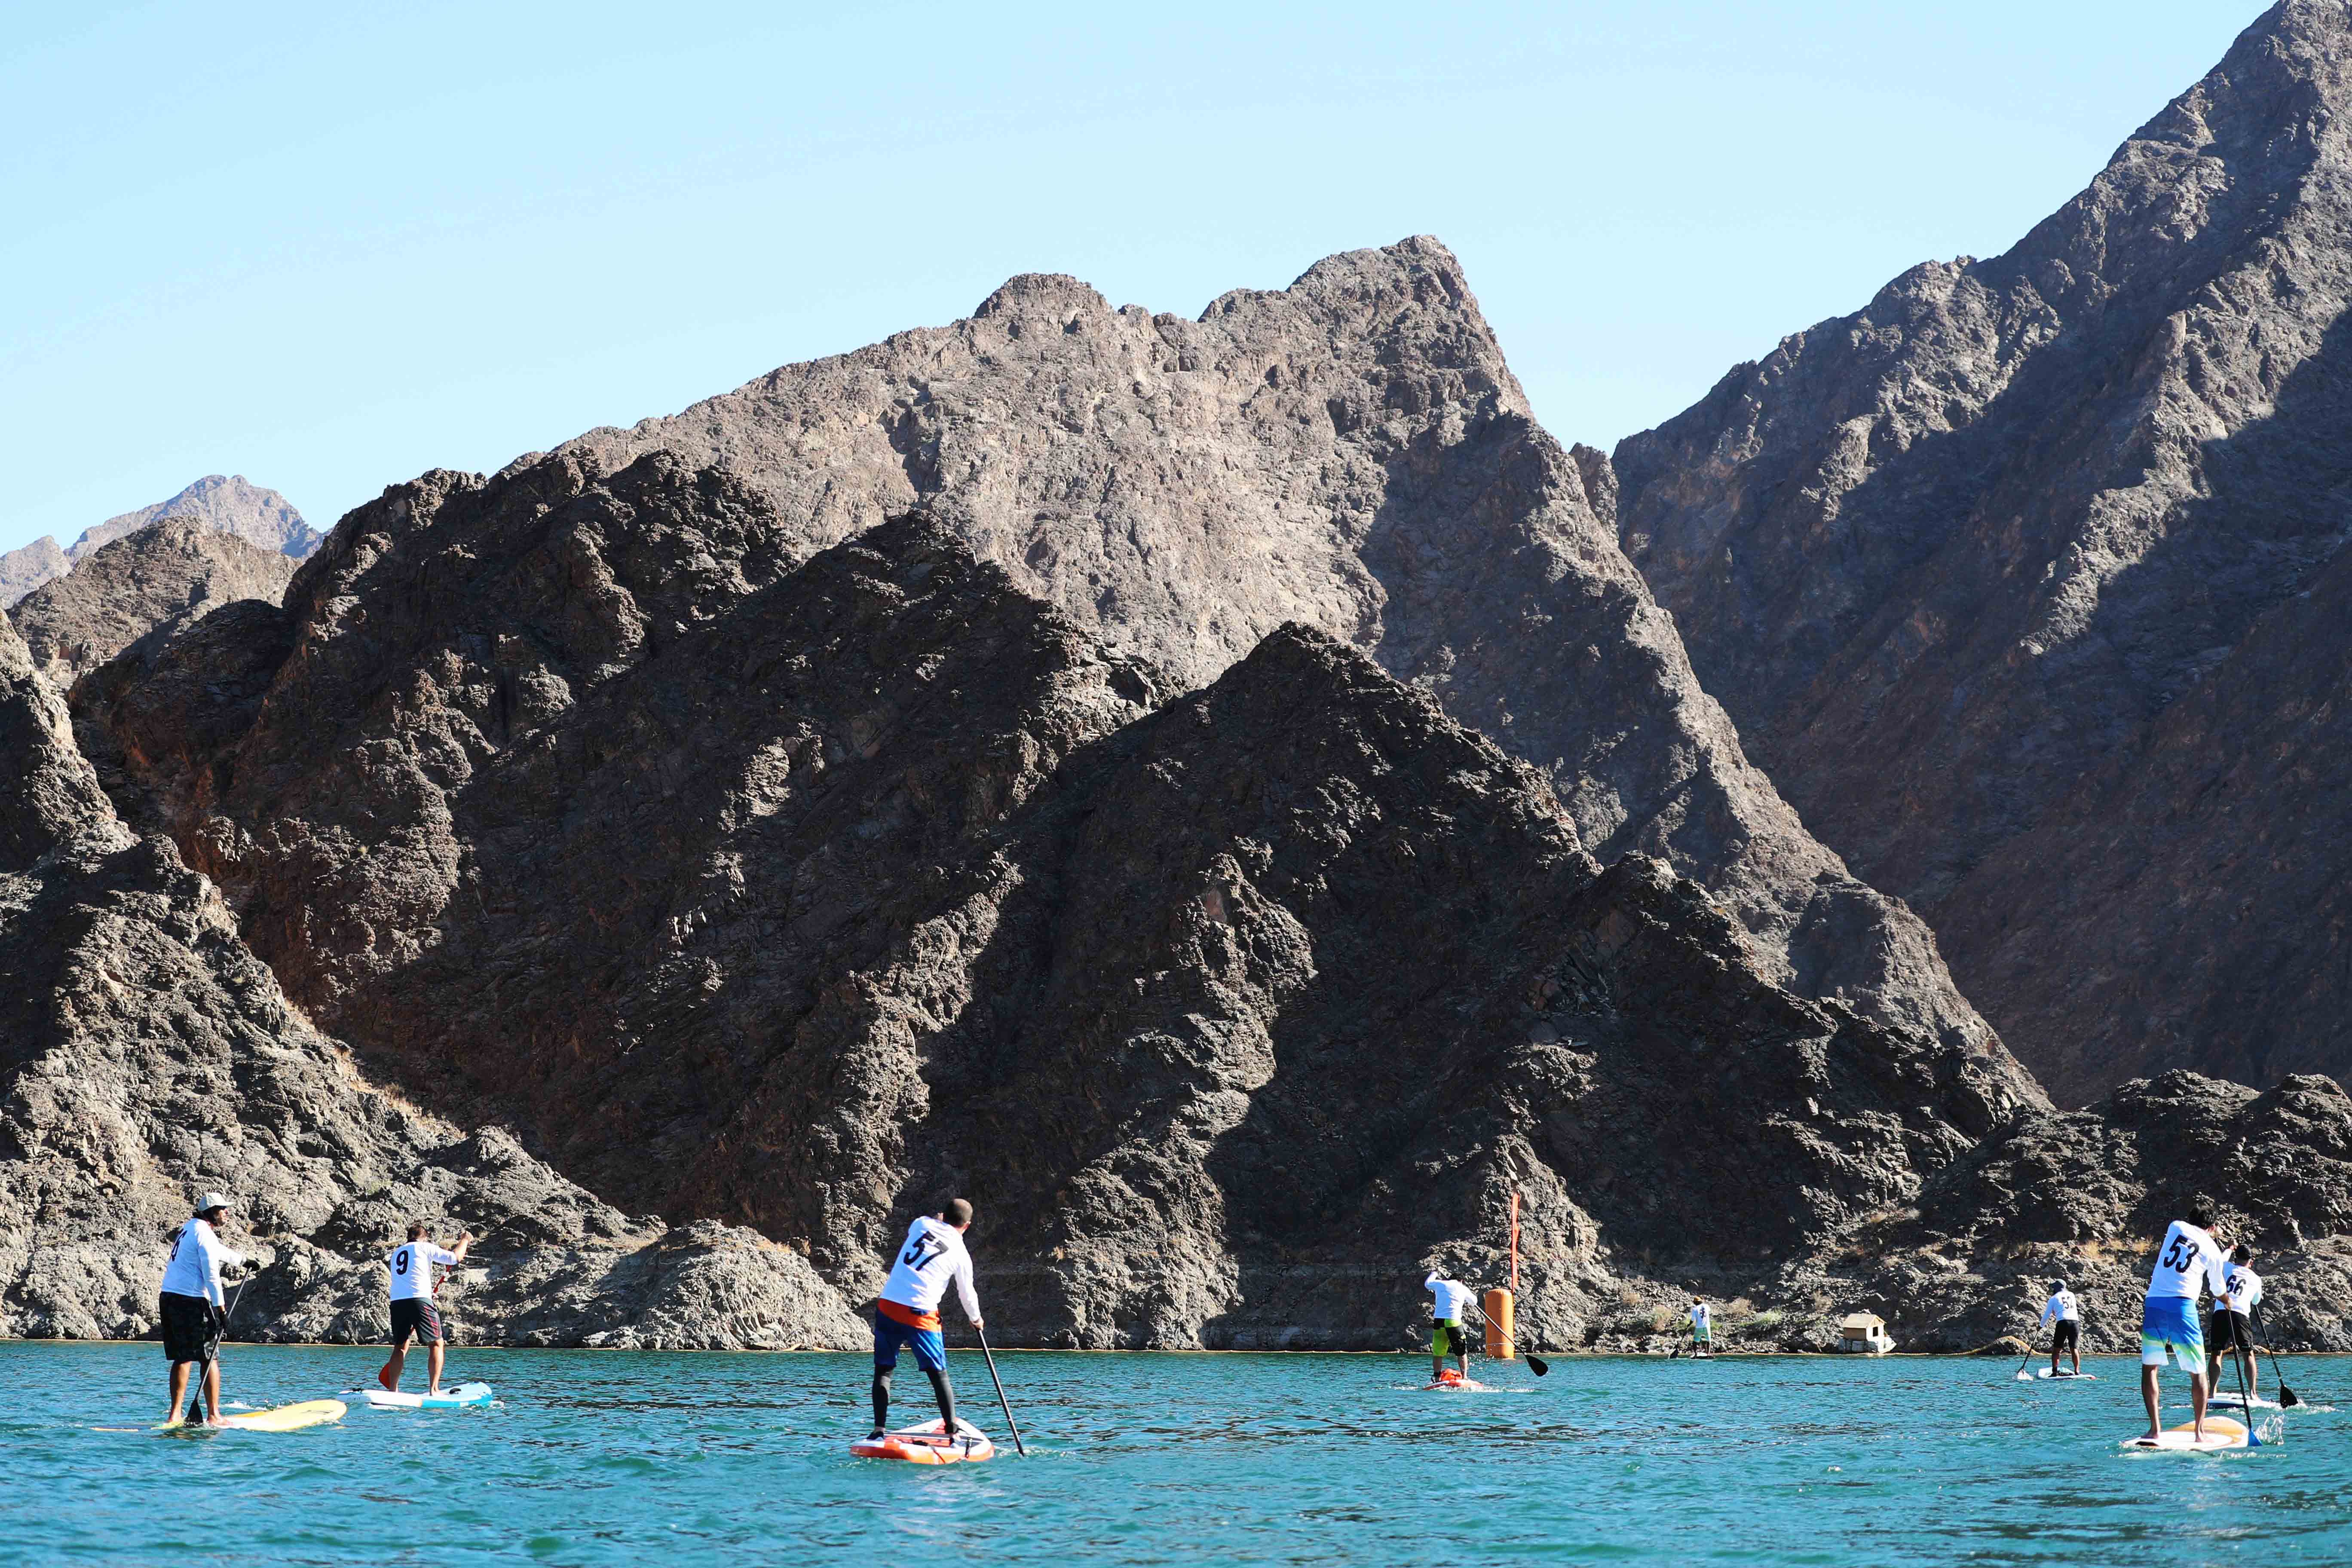 100,000 AED Total Prize Money for the winners of Hatta Standup Paddling & Kayak Competition